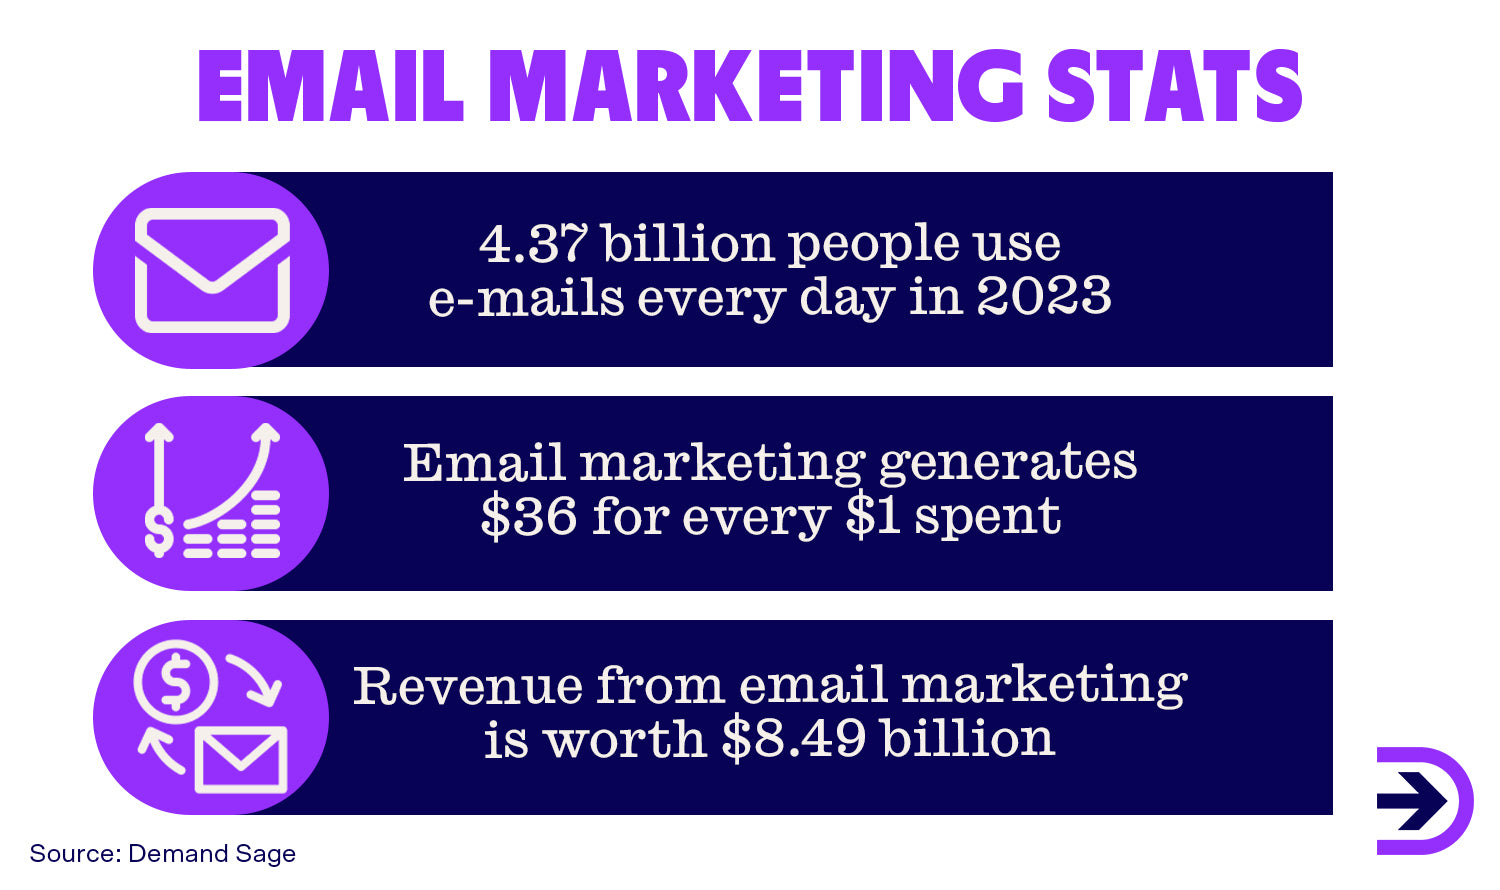 Email marketing is a highly effective marketing strategy and has an estimated ROI of $36 for every $1 spent.